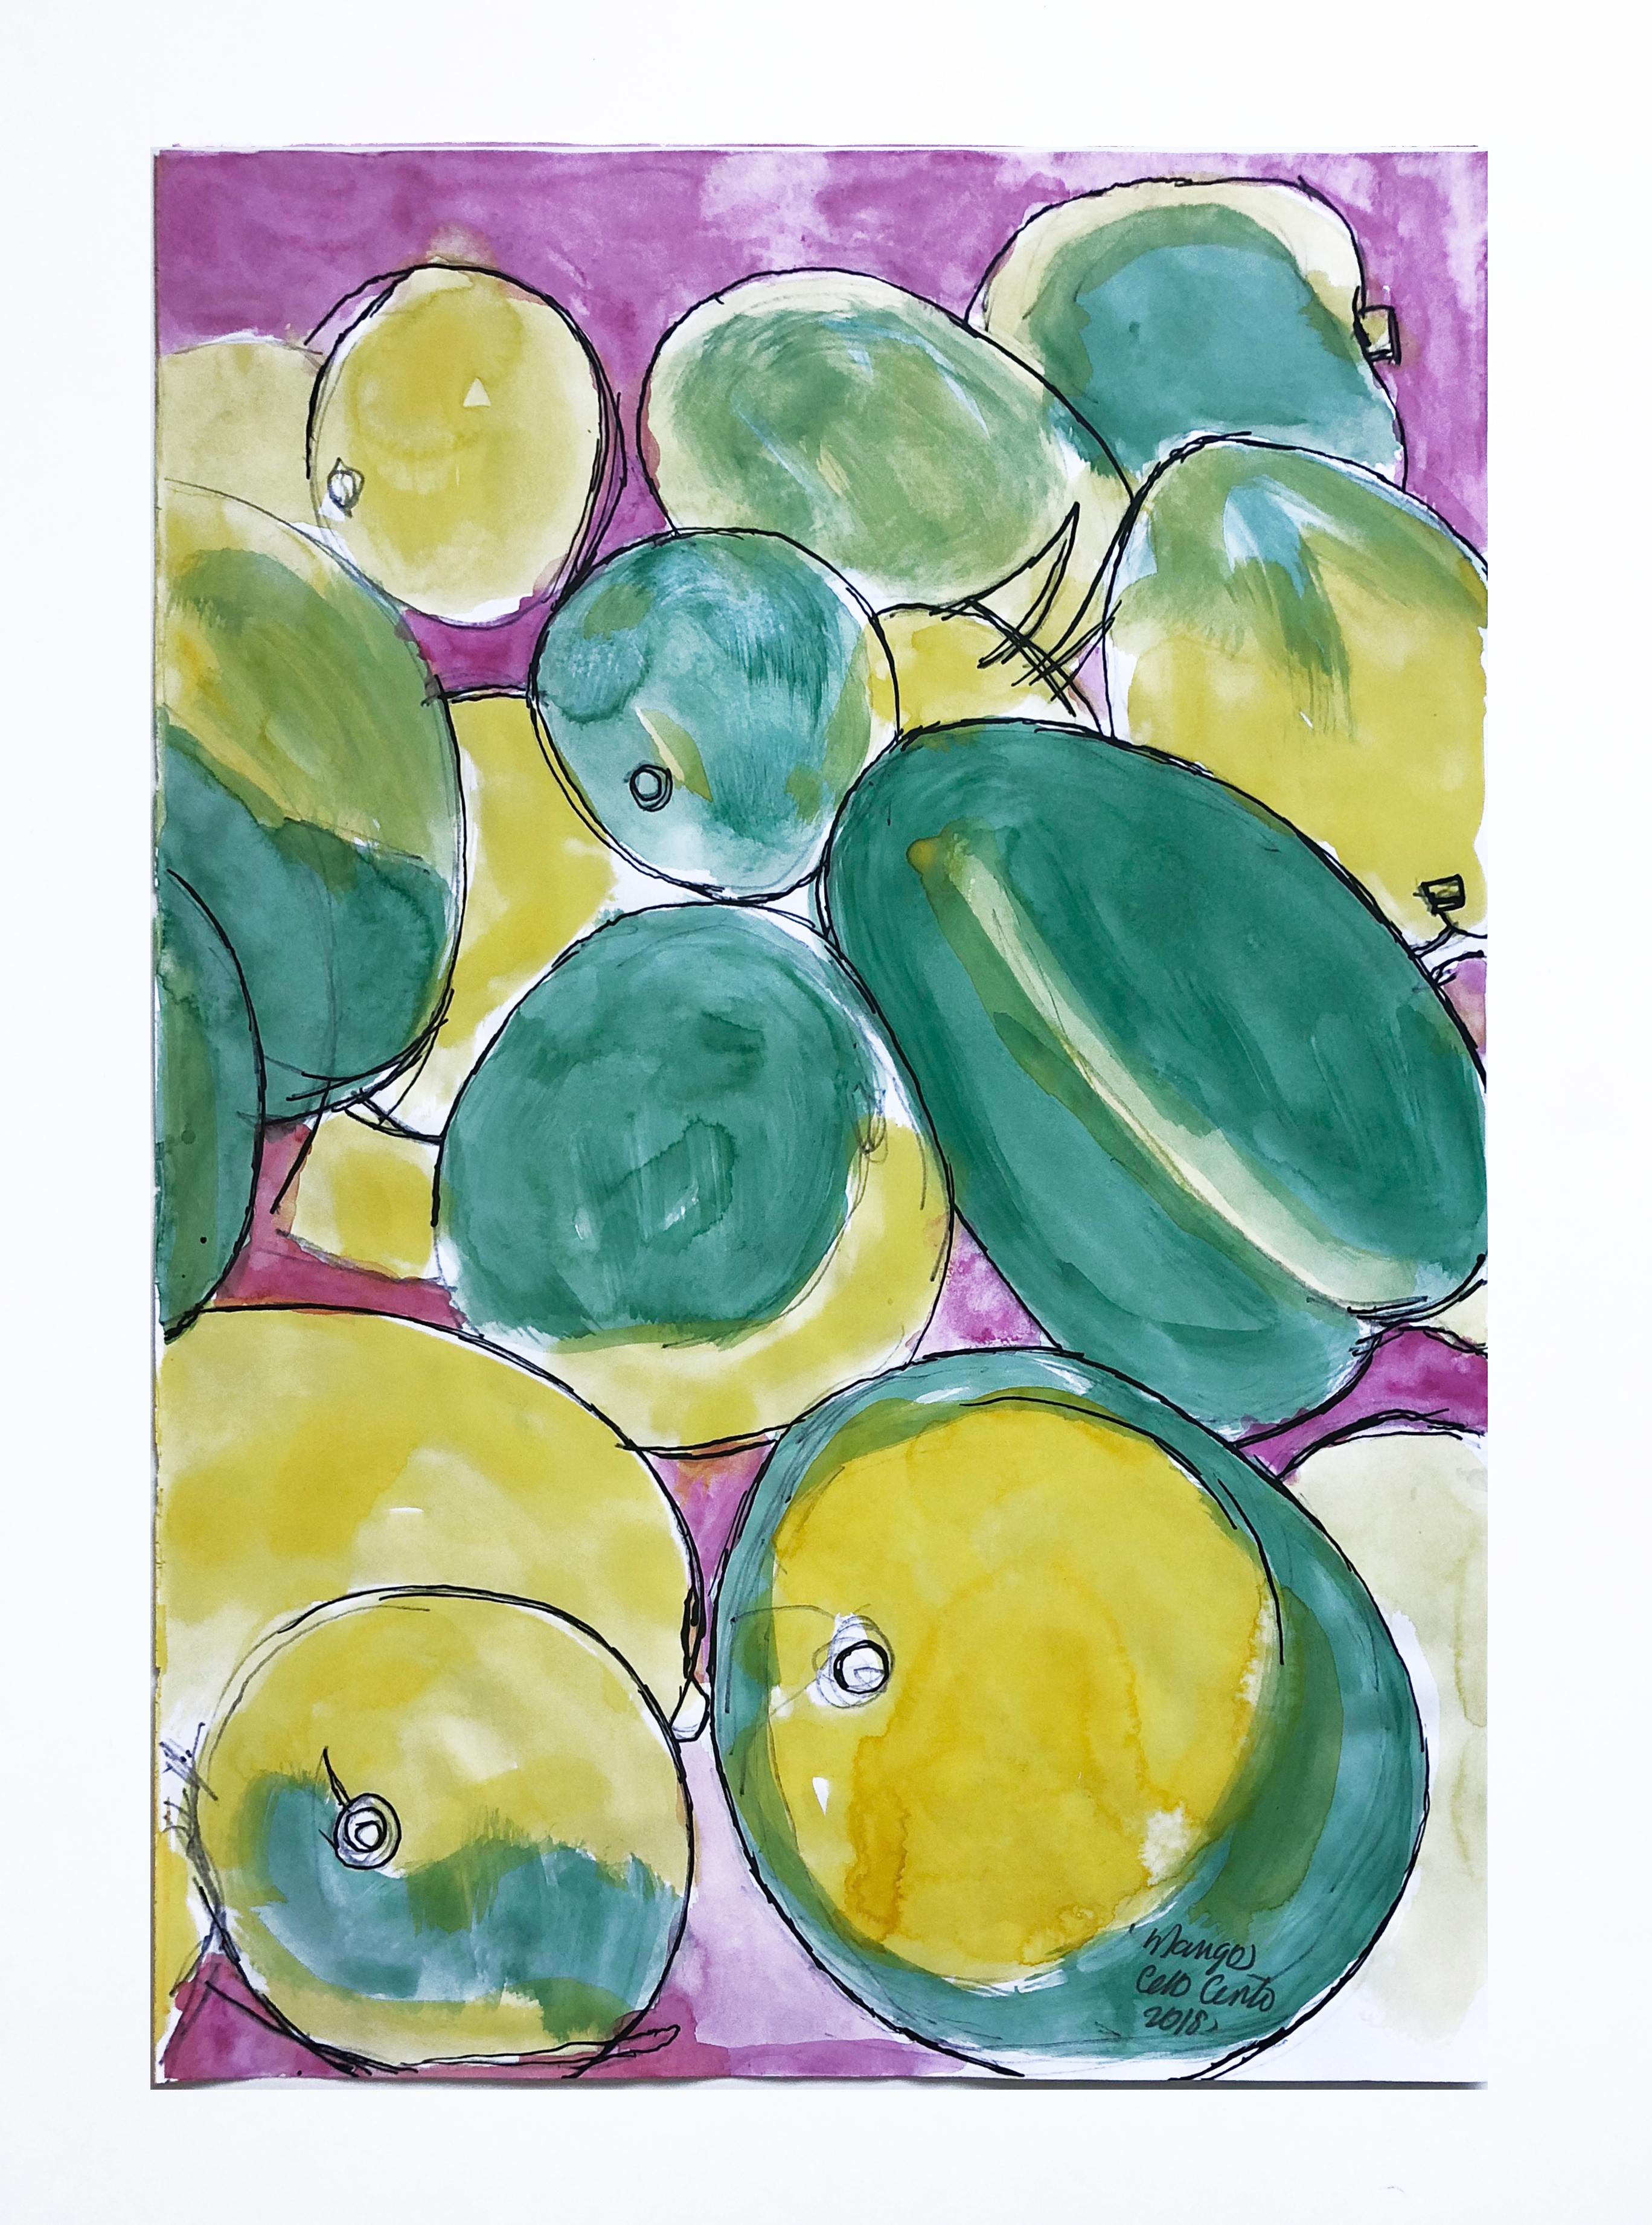 Mangos by Celso Castro
Watercolor and ink on archival paper
Individual size: 19.38 in. H x 13.5 in. W
Overall size: 19.38 in. H x 27 in. W
One of a kind
2018

Celso Castro-Daza was born in Valledupar, Colombia. He has a BFA from Pratt